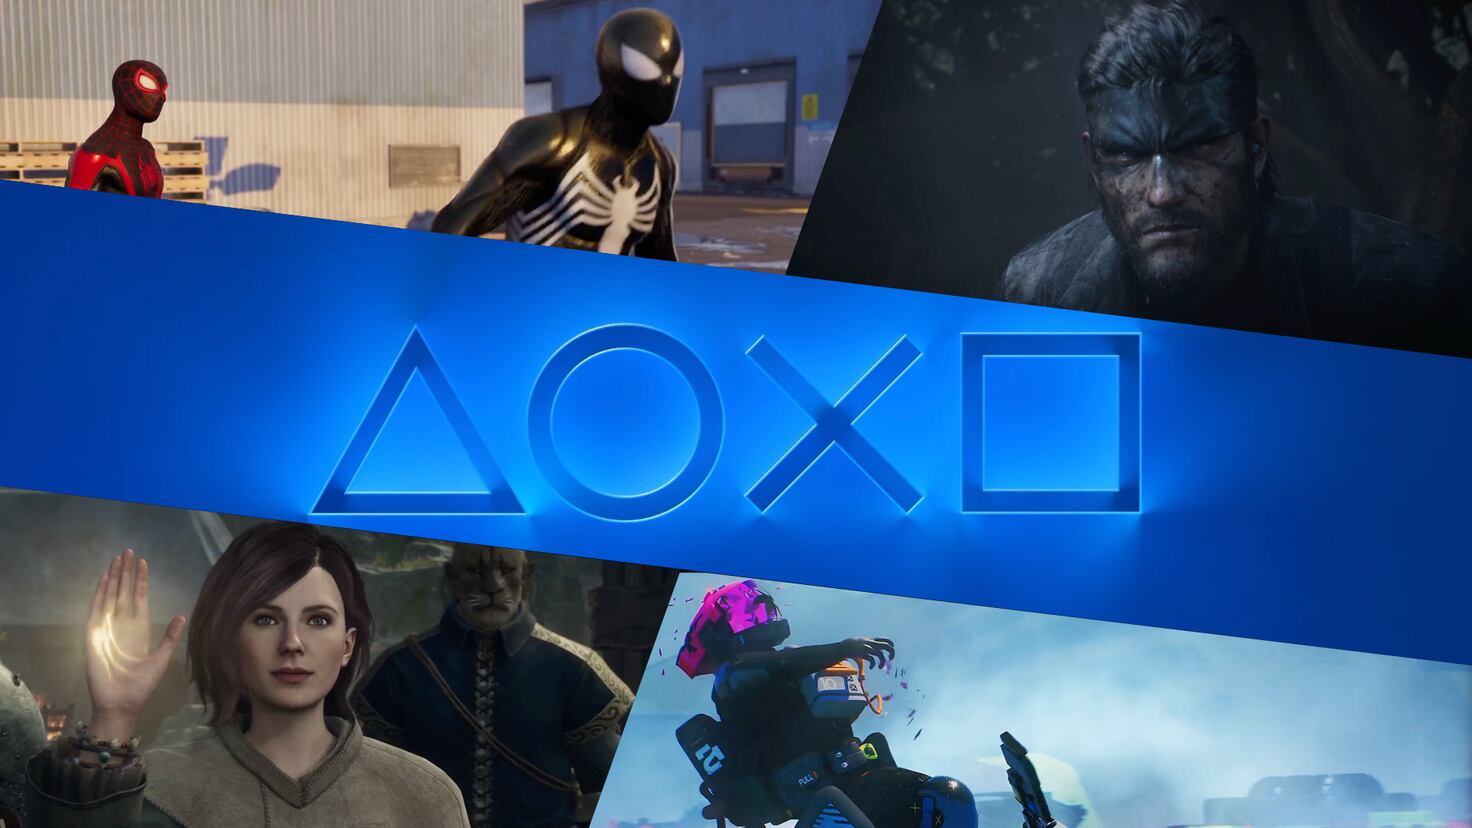 PlayStation Showcase May 2023: The Biggest Games And Announcements